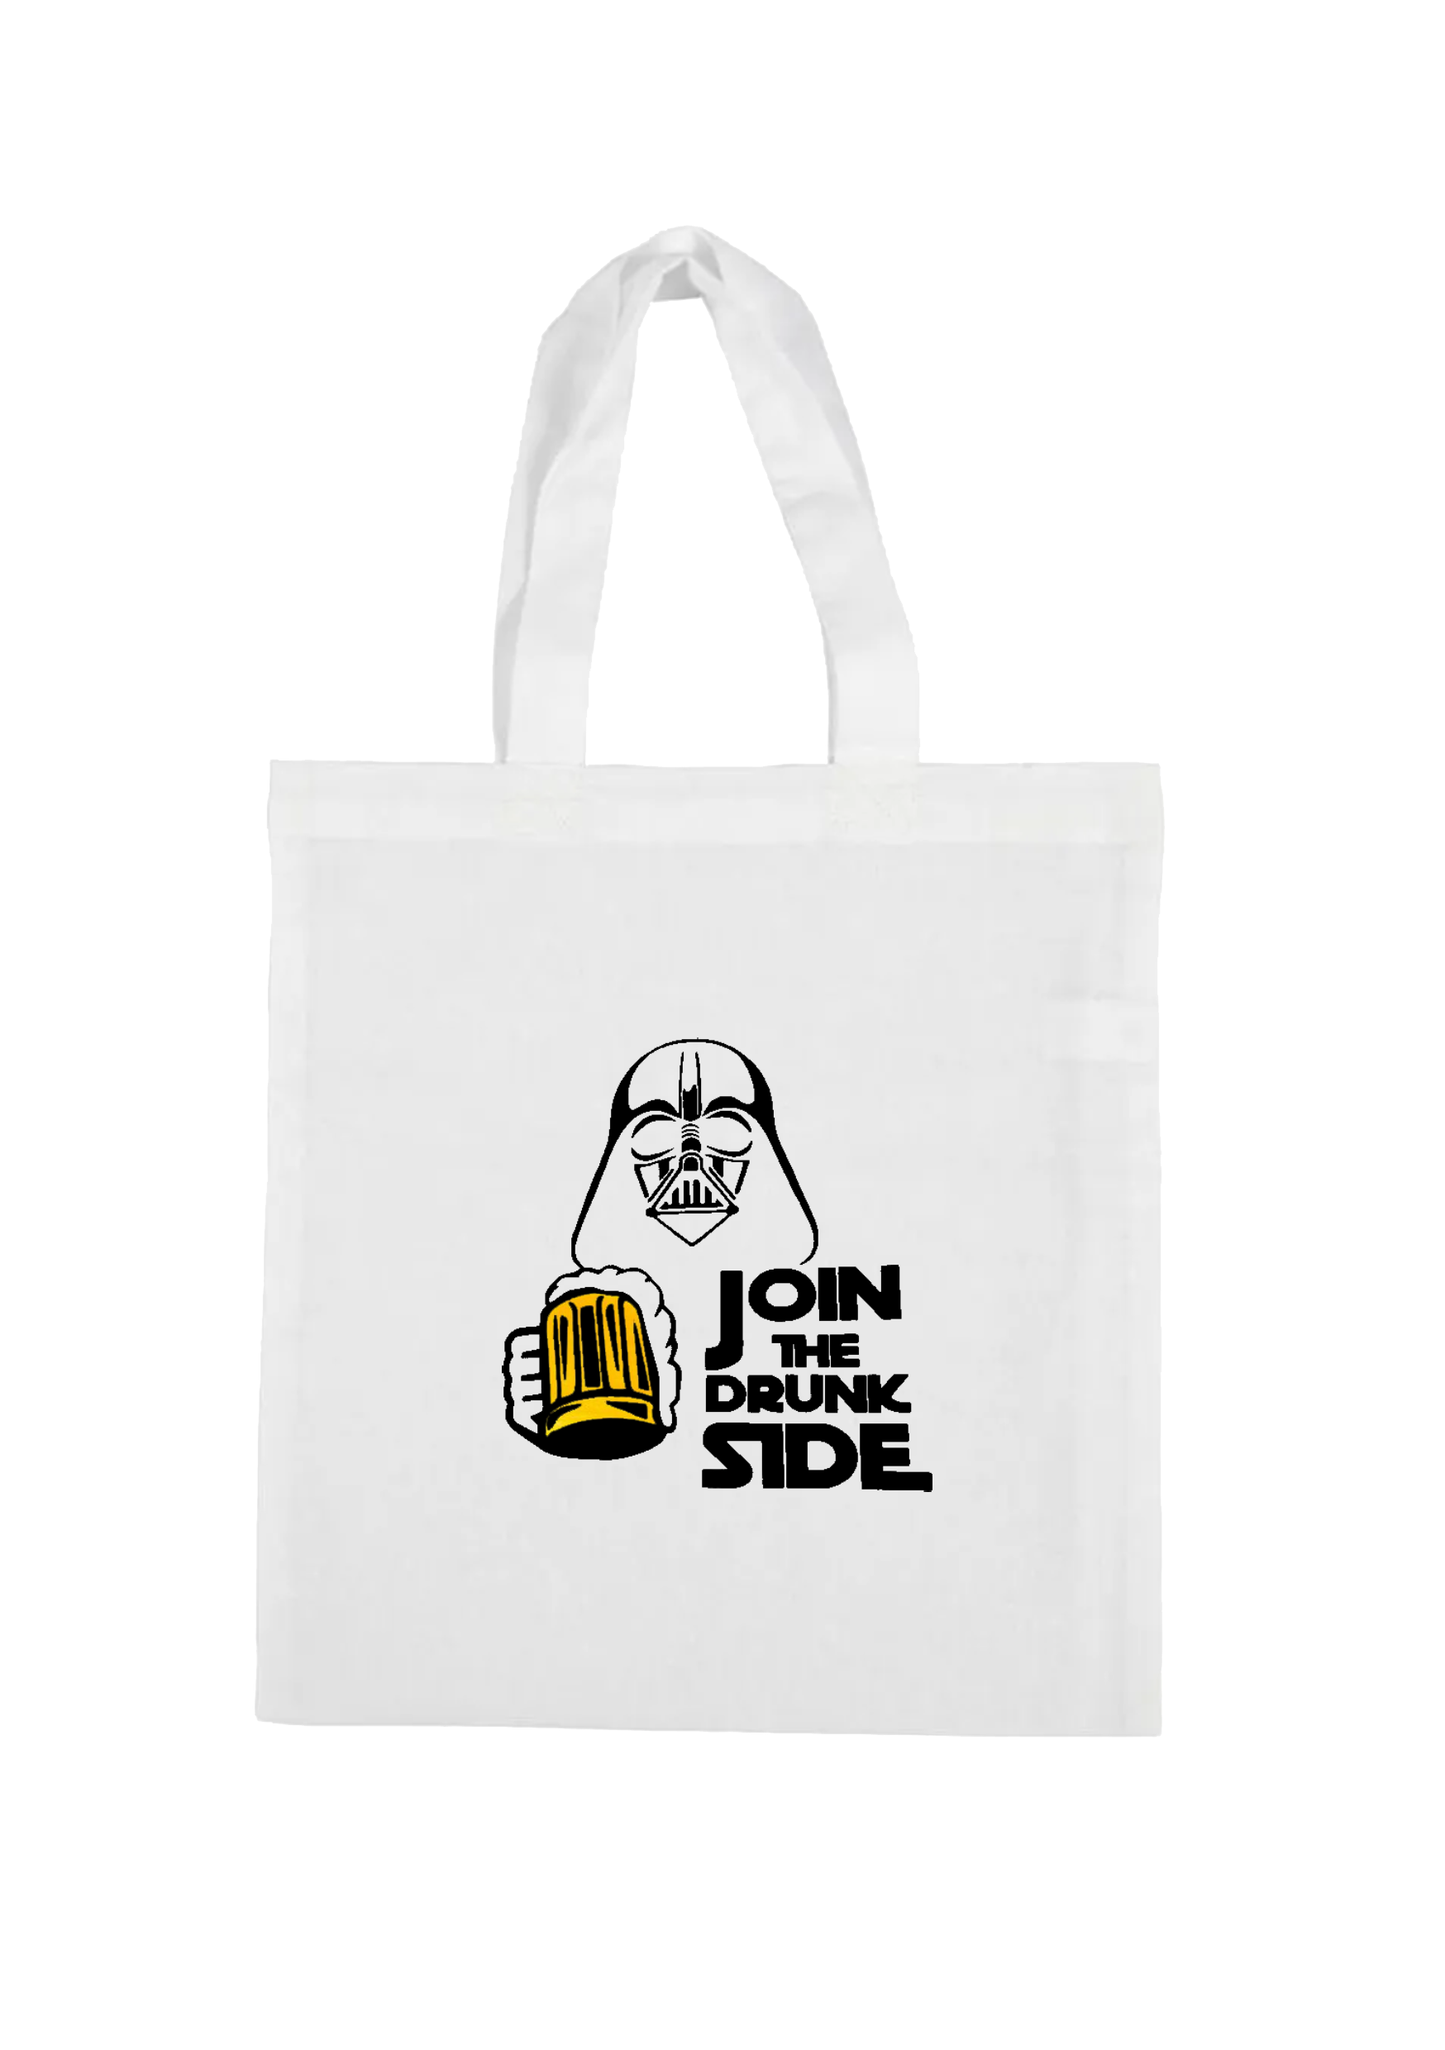 shopping bag bag-join in the drunk side star darth